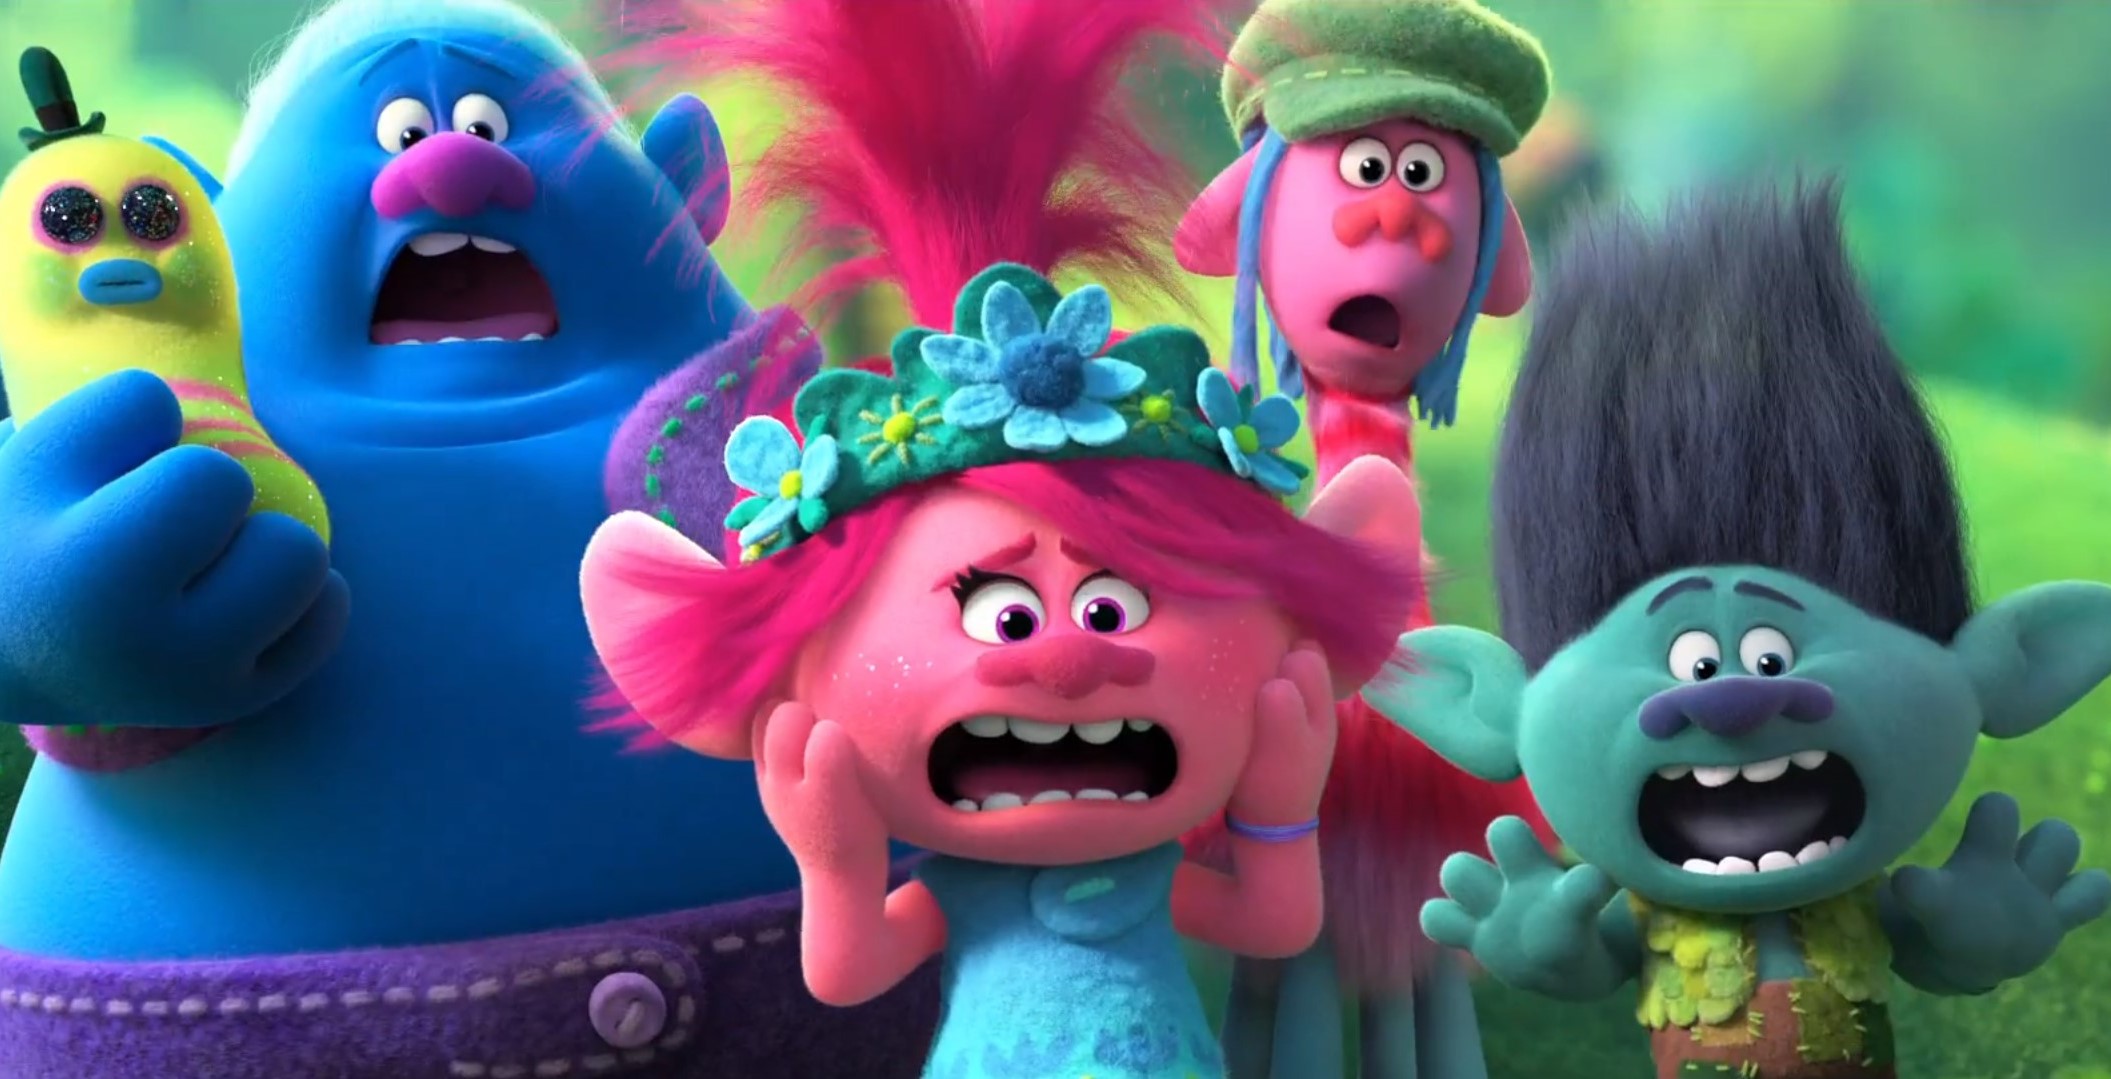 Universal To Release TROLLS 2, Other New Movies To VOD (NEWS/ANALYSIS)